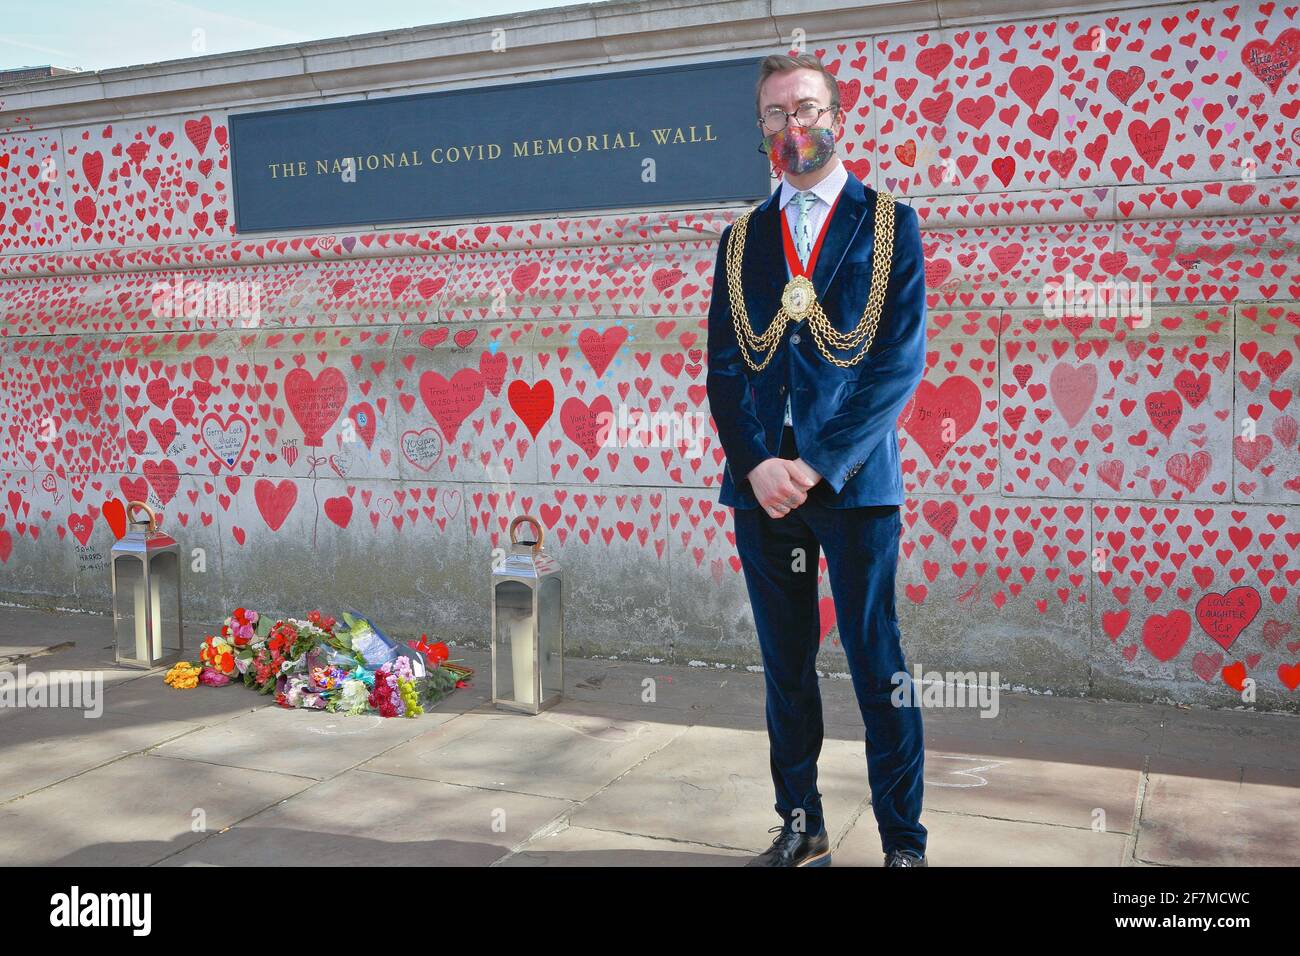 London (UK), 8 April 2021: The Mayor of Lambeth, Philip Normal, visits the completed National Covid Memorial Wall.He said 'it was incredibly moving to Stock Photo